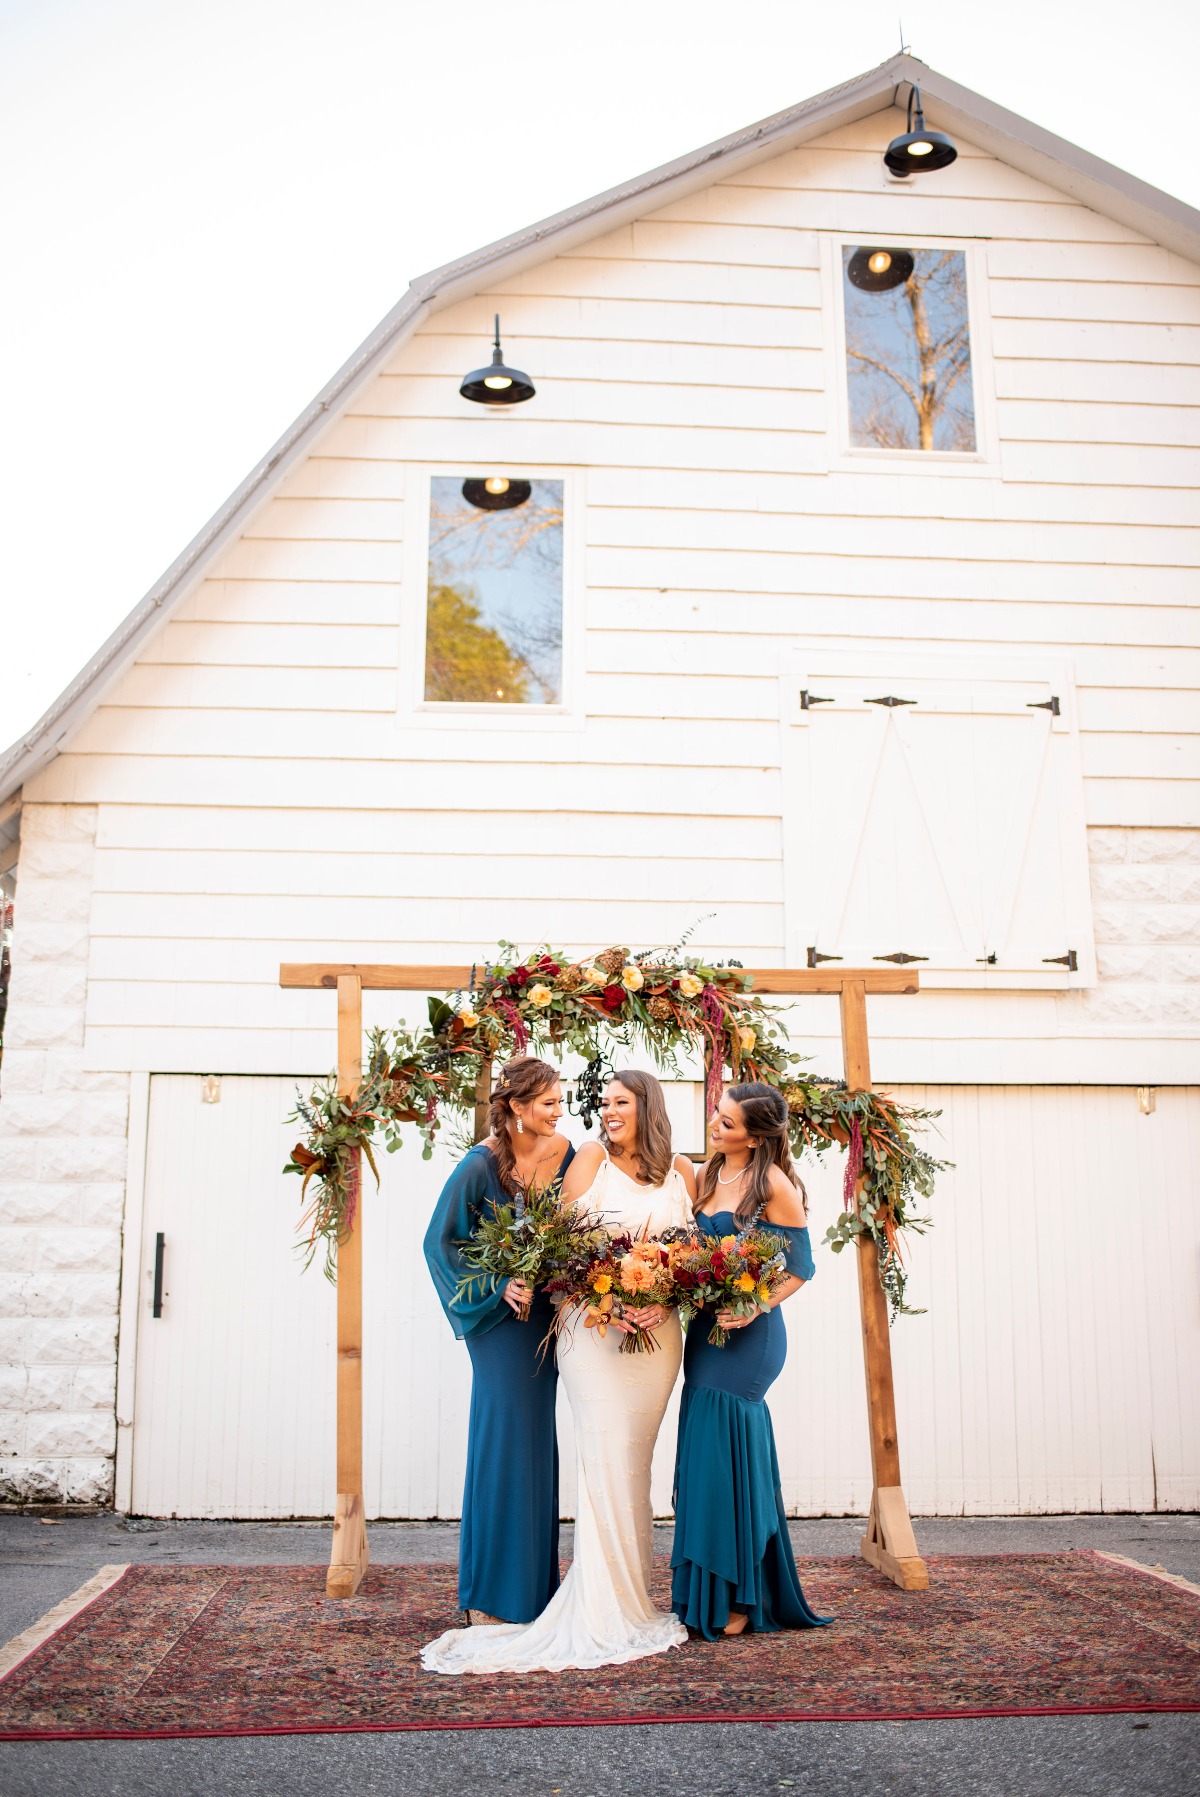 Bridesmaids style in blue